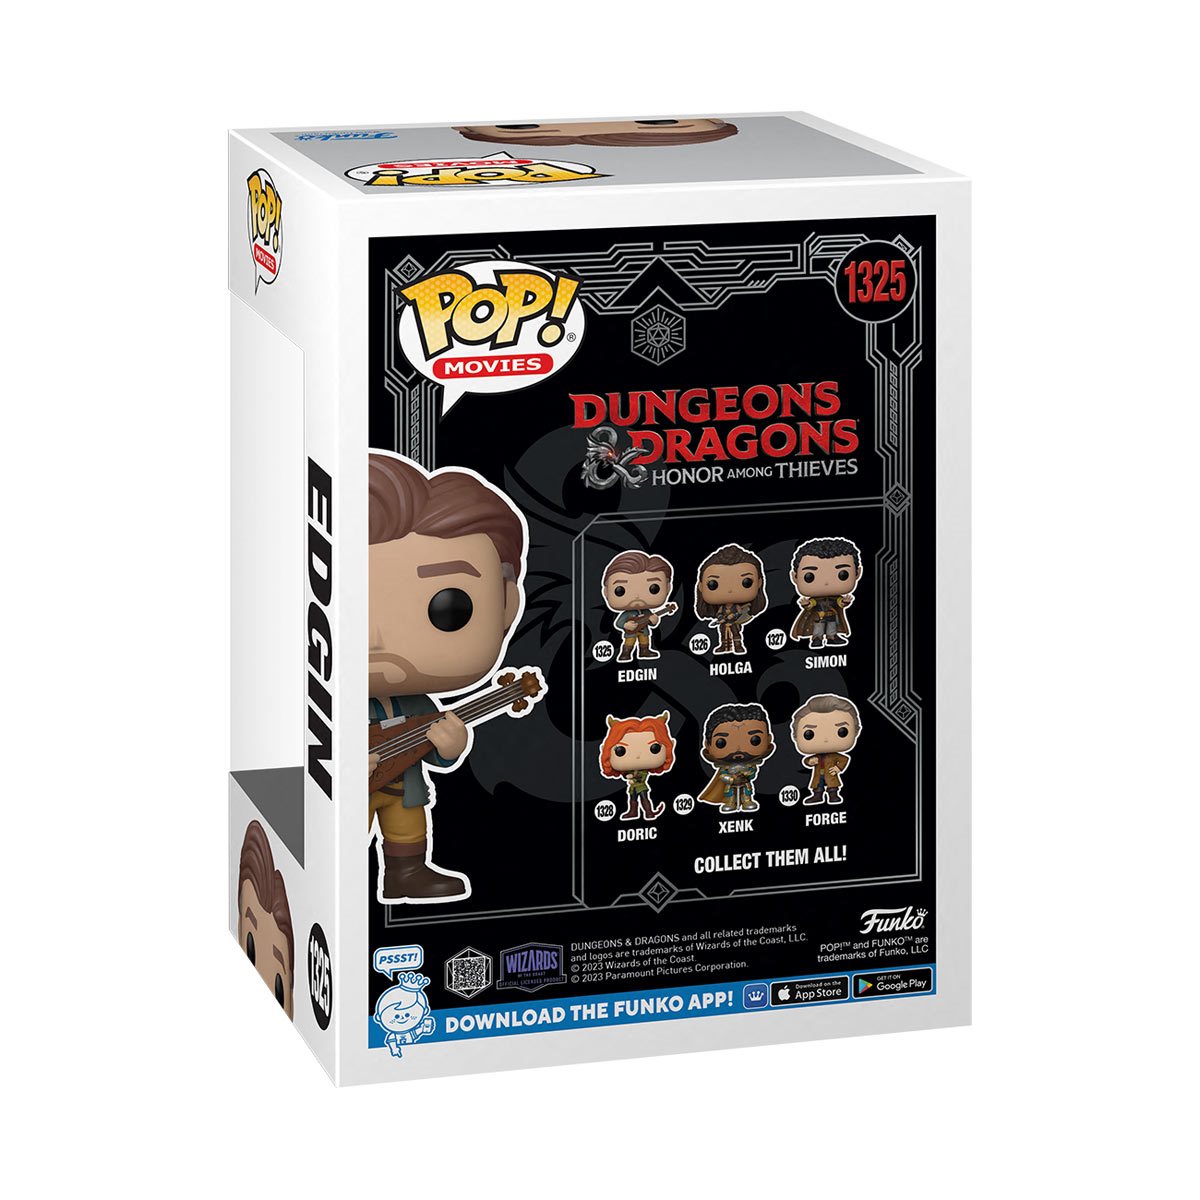 Funko Pop Movies: Dungeons And Dragons - Edgin